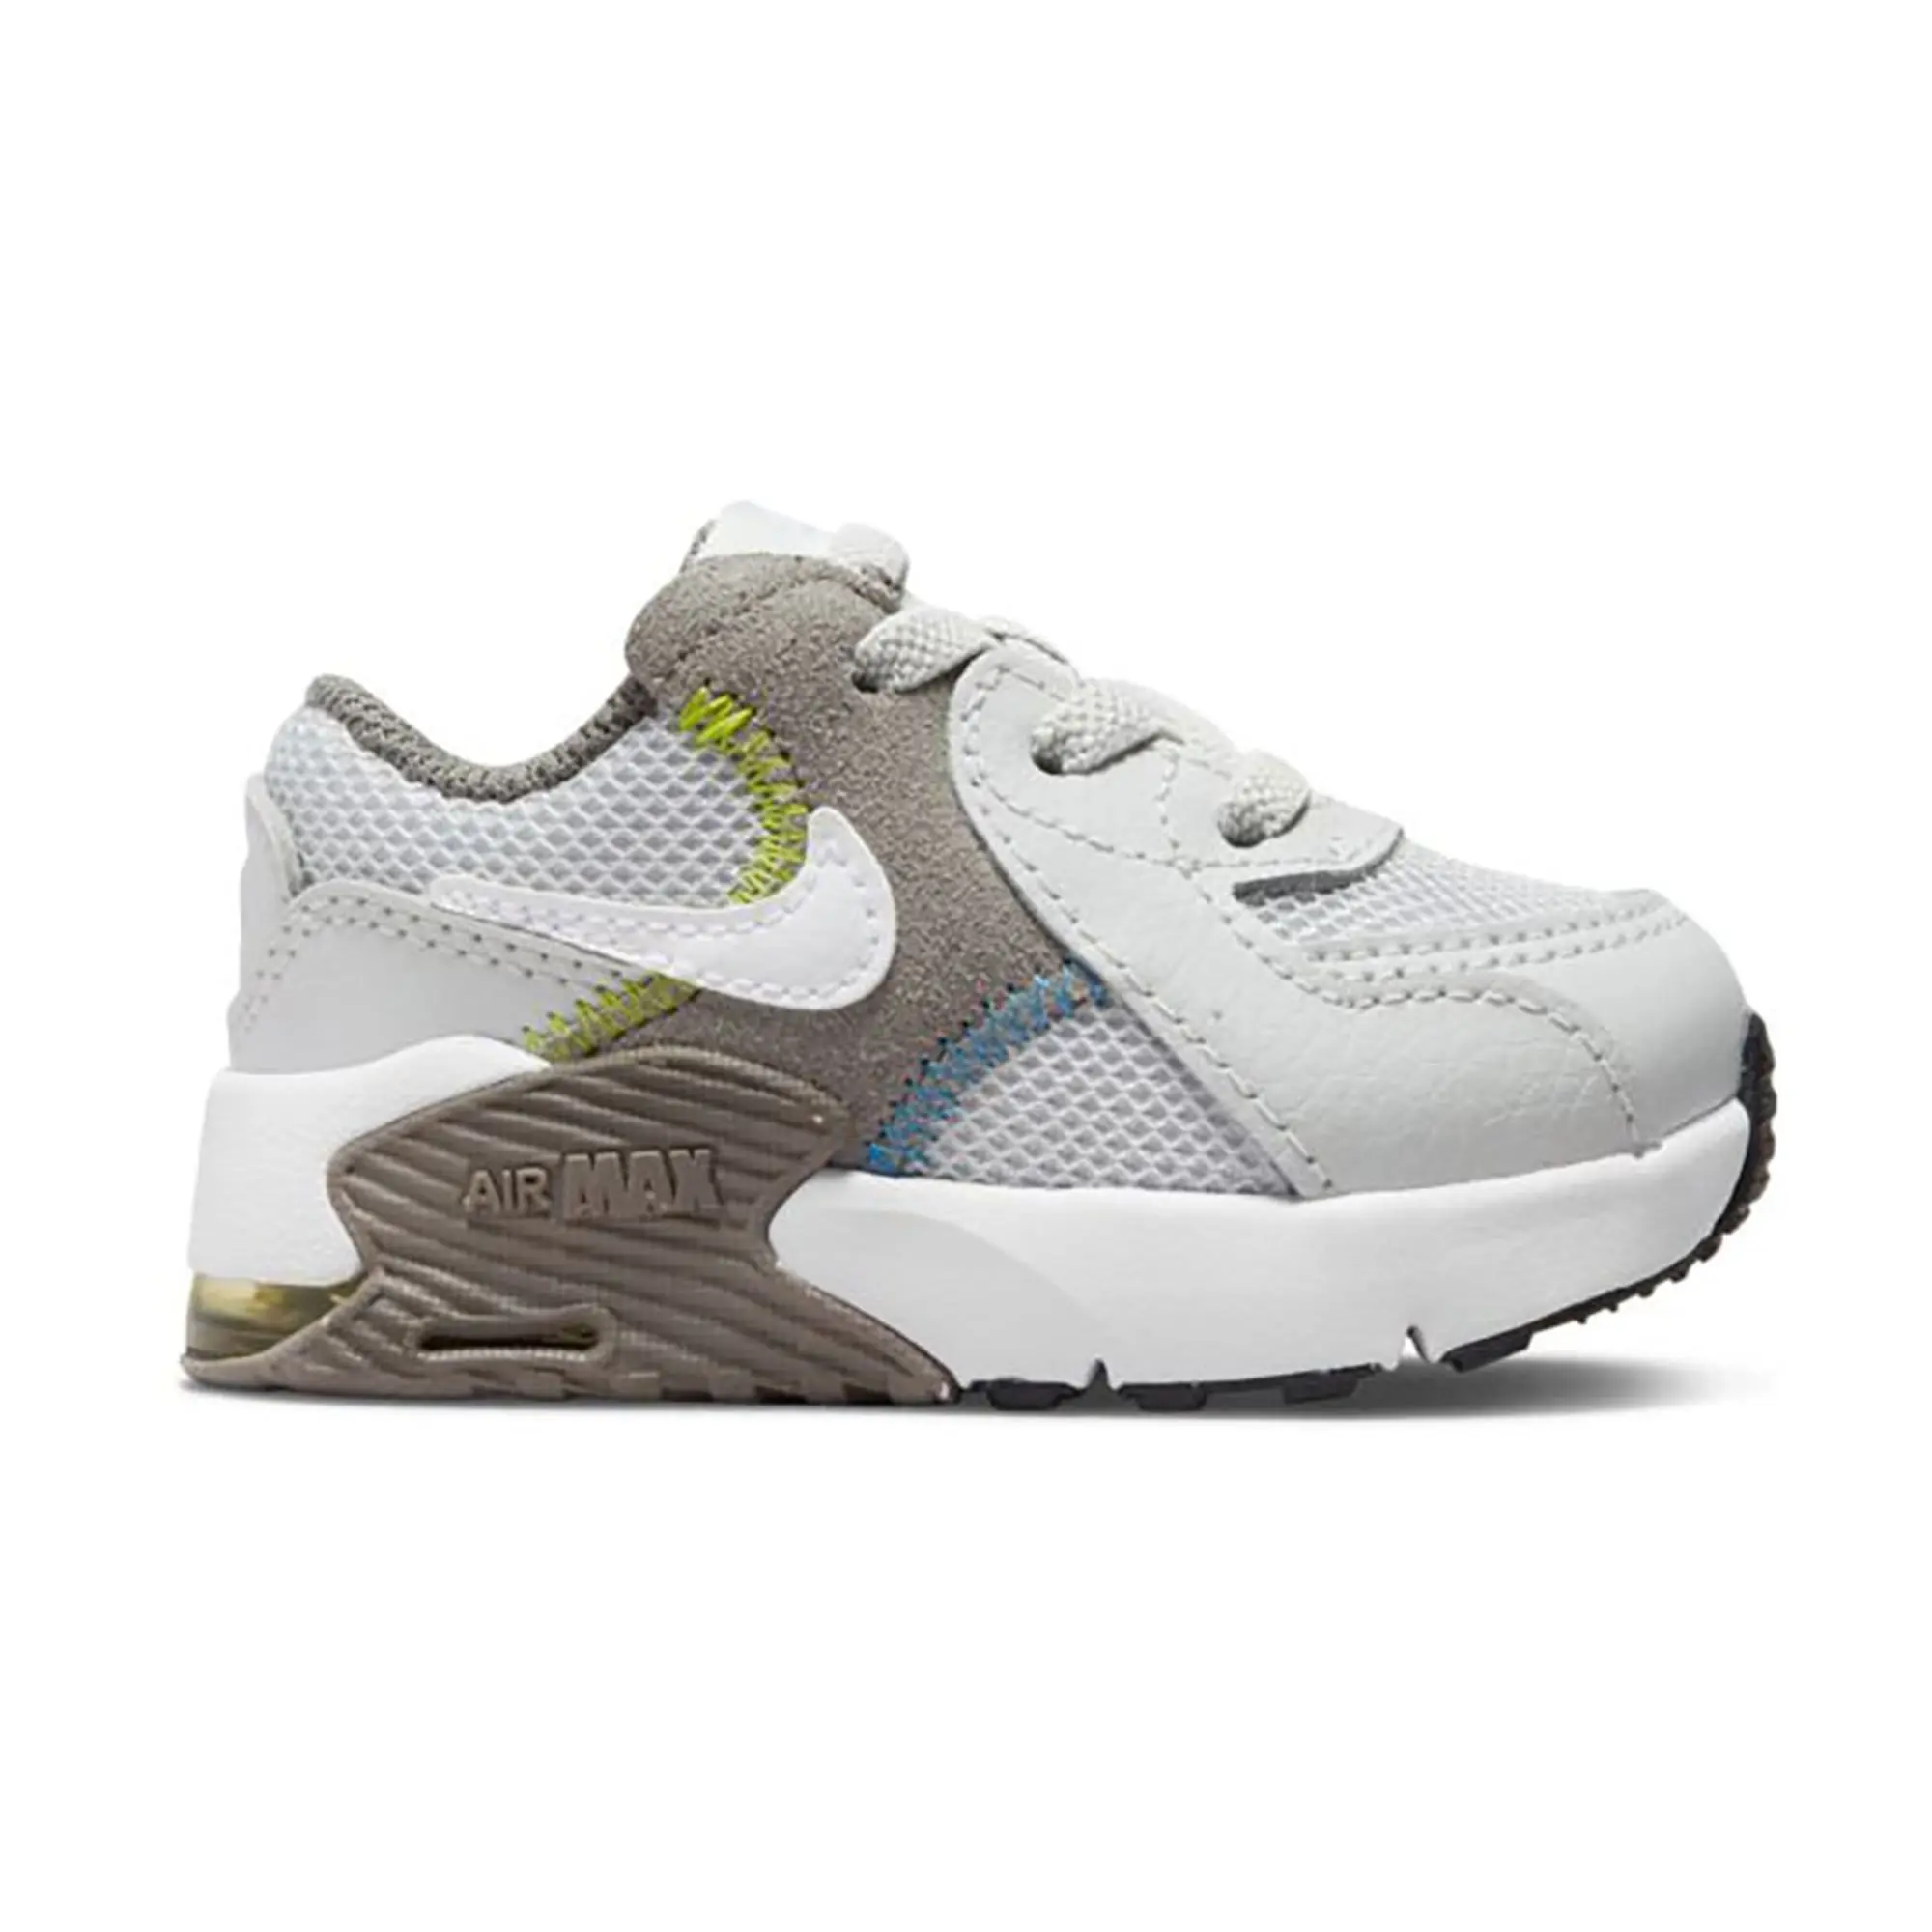 Nike light grey air max excee Boys Toddler Trainers